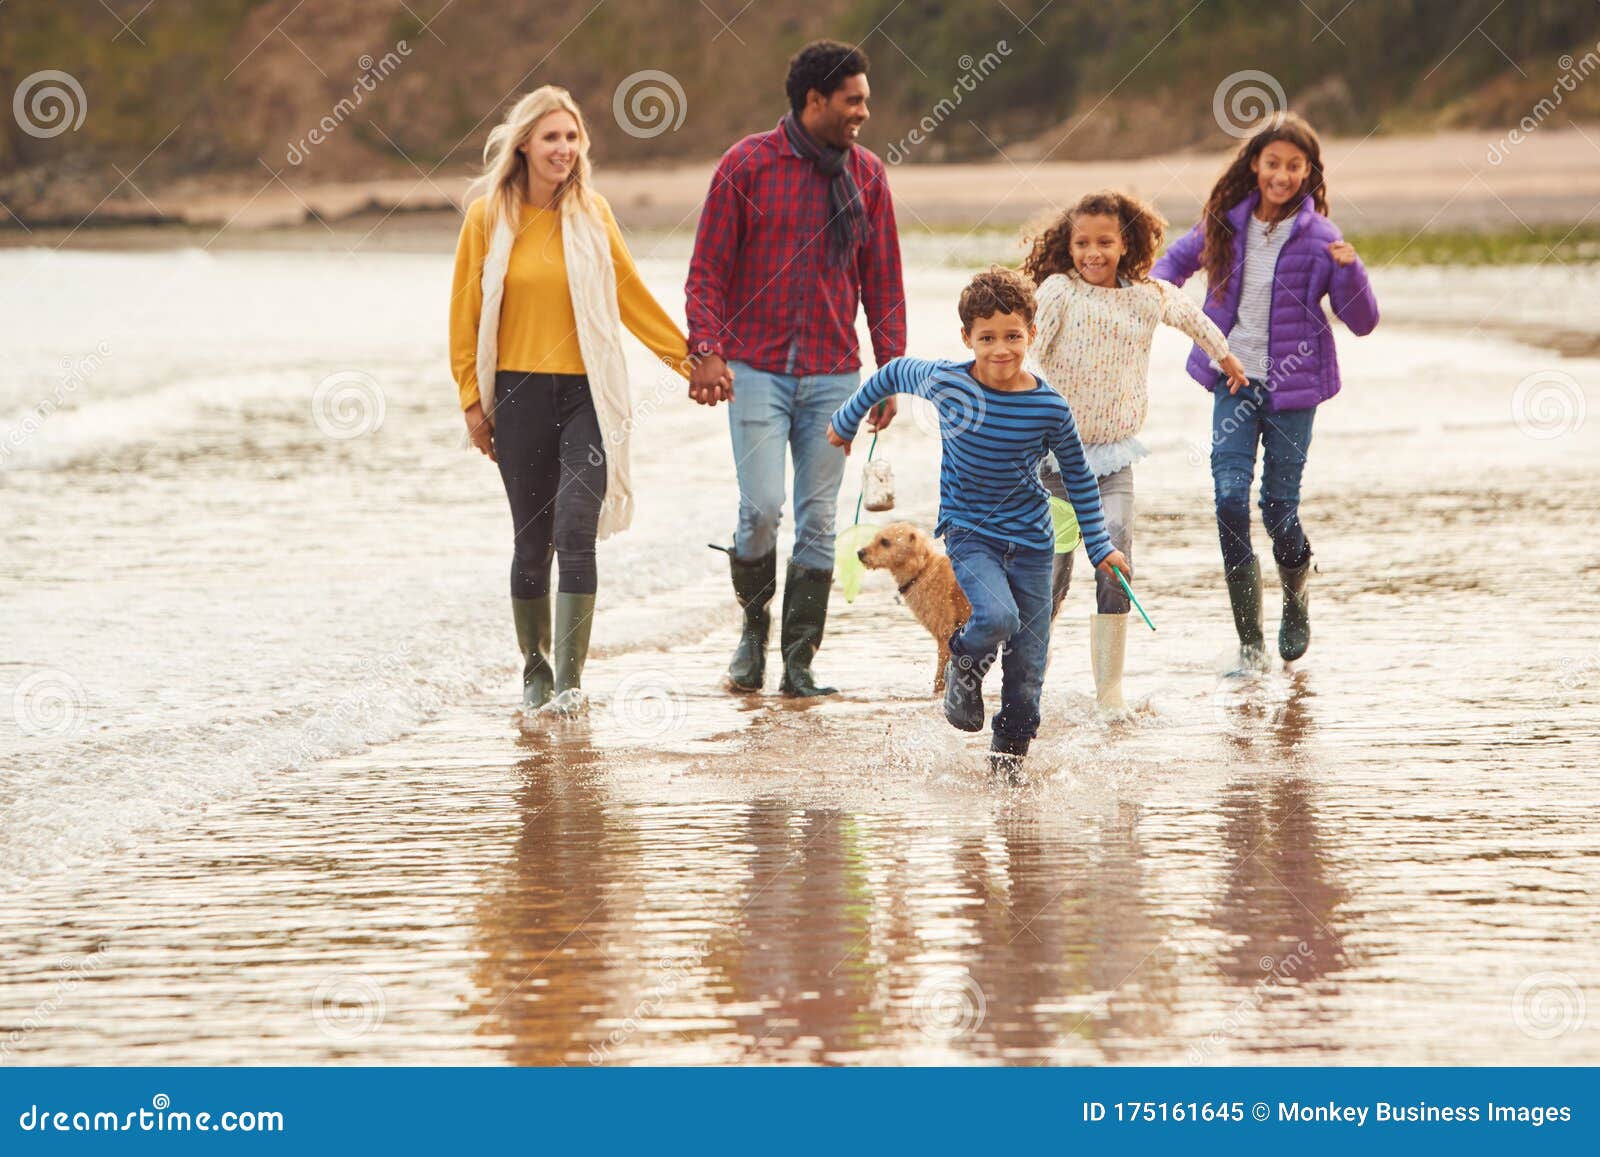 multi-cultural family with pet dog walking along beach shoreline on winter vacation